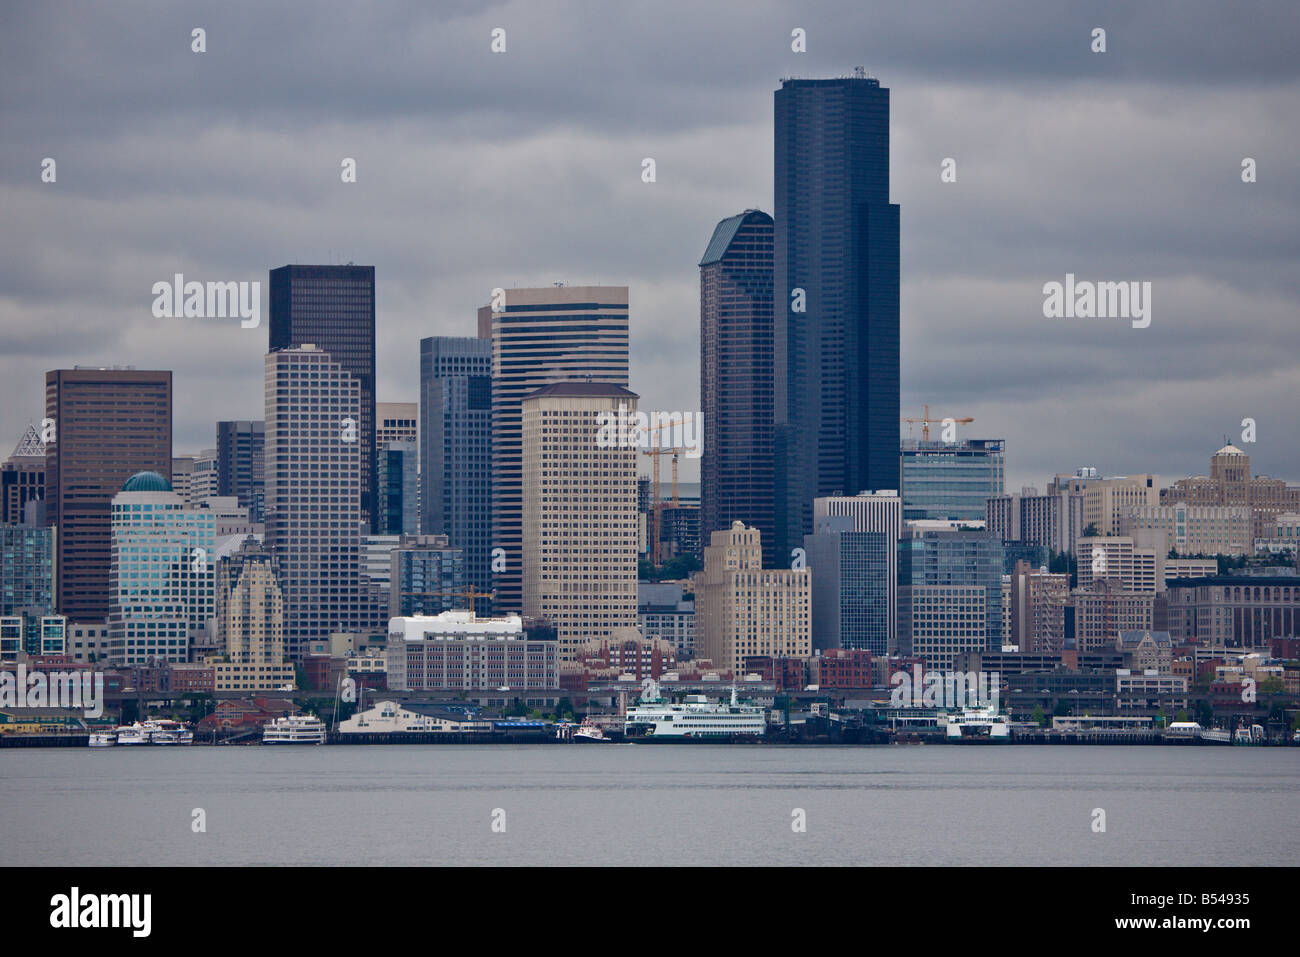 Seattle skyline on a typical cloudy day from Elliot Bay Stock Photo